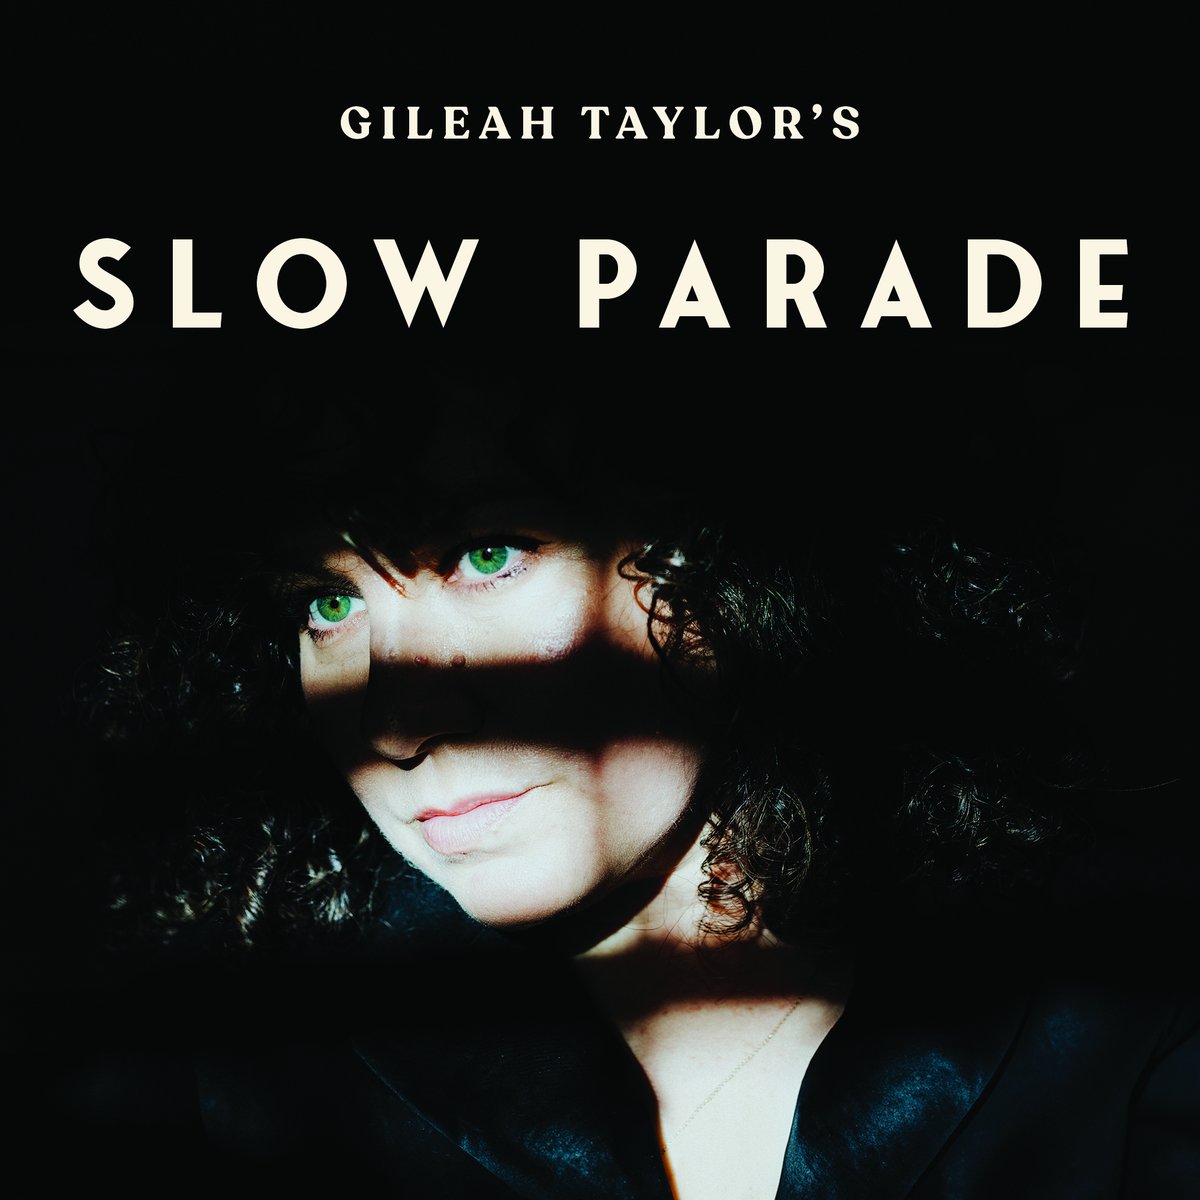 Time to head to Florida for a meet and greet with singer/songwriter, @GileahTaylor. Come to The Antidote for the details about her just released album, 'Slow Parade'. Live stream through Trent Radio, Wed May 8th, 9pm EDT onlineradiobox.com/ca/cfff/